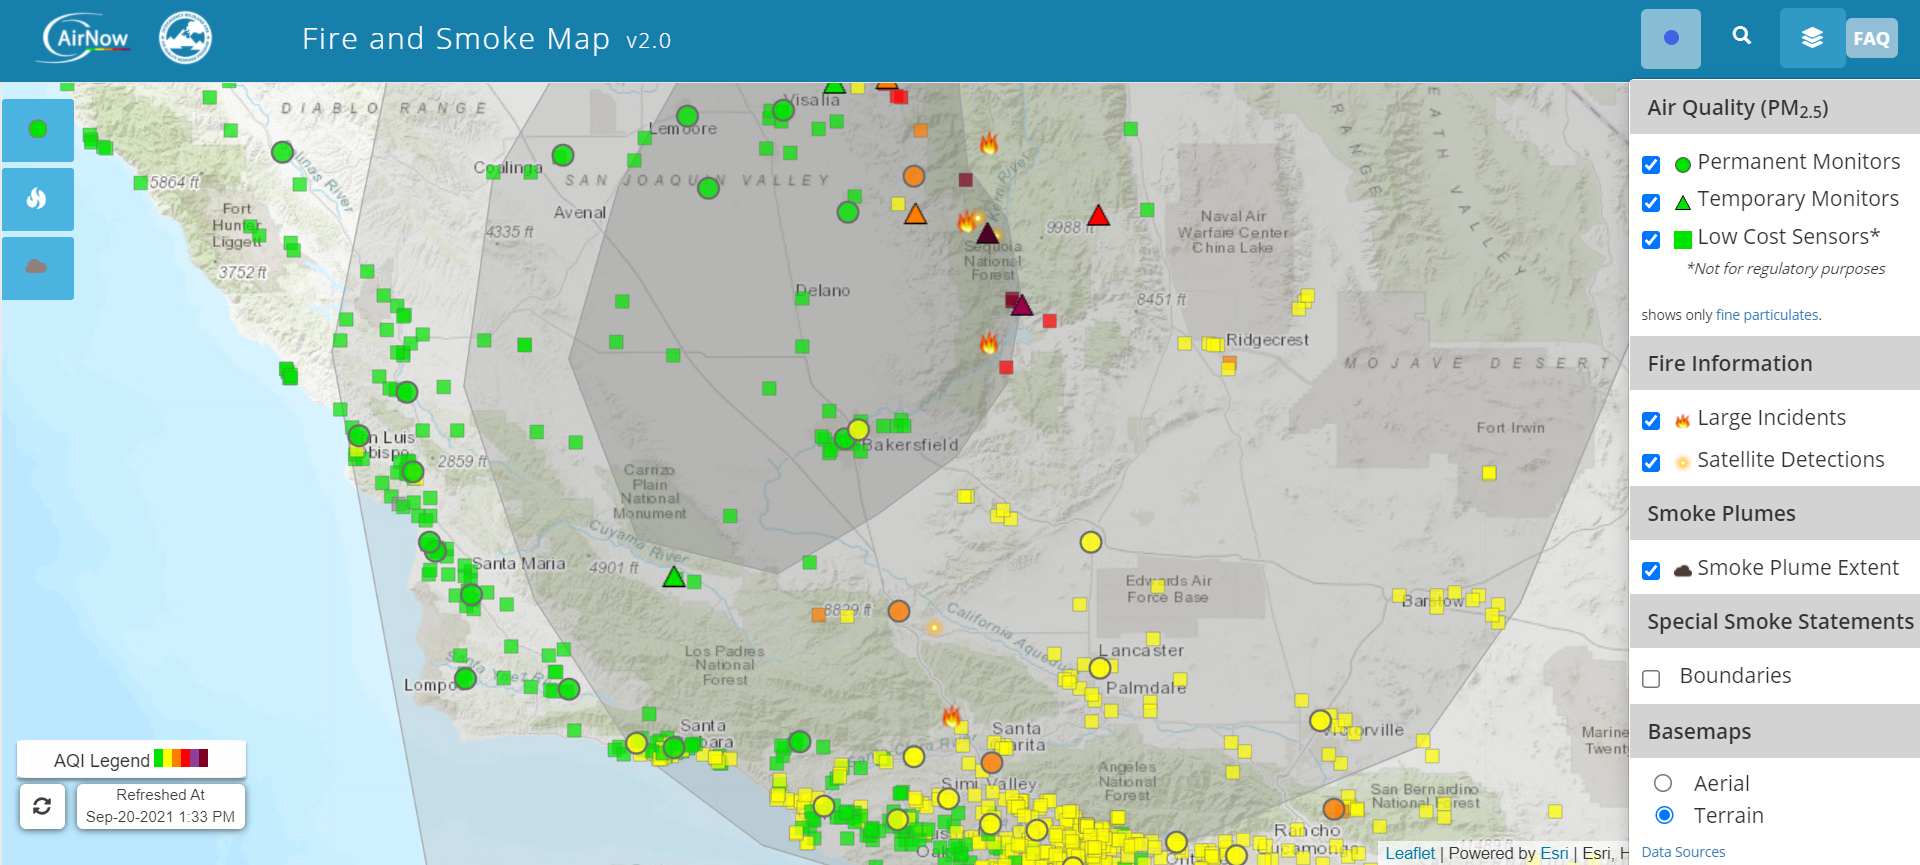 Screen capture of Fire And Smoke Map from AirNow.gov